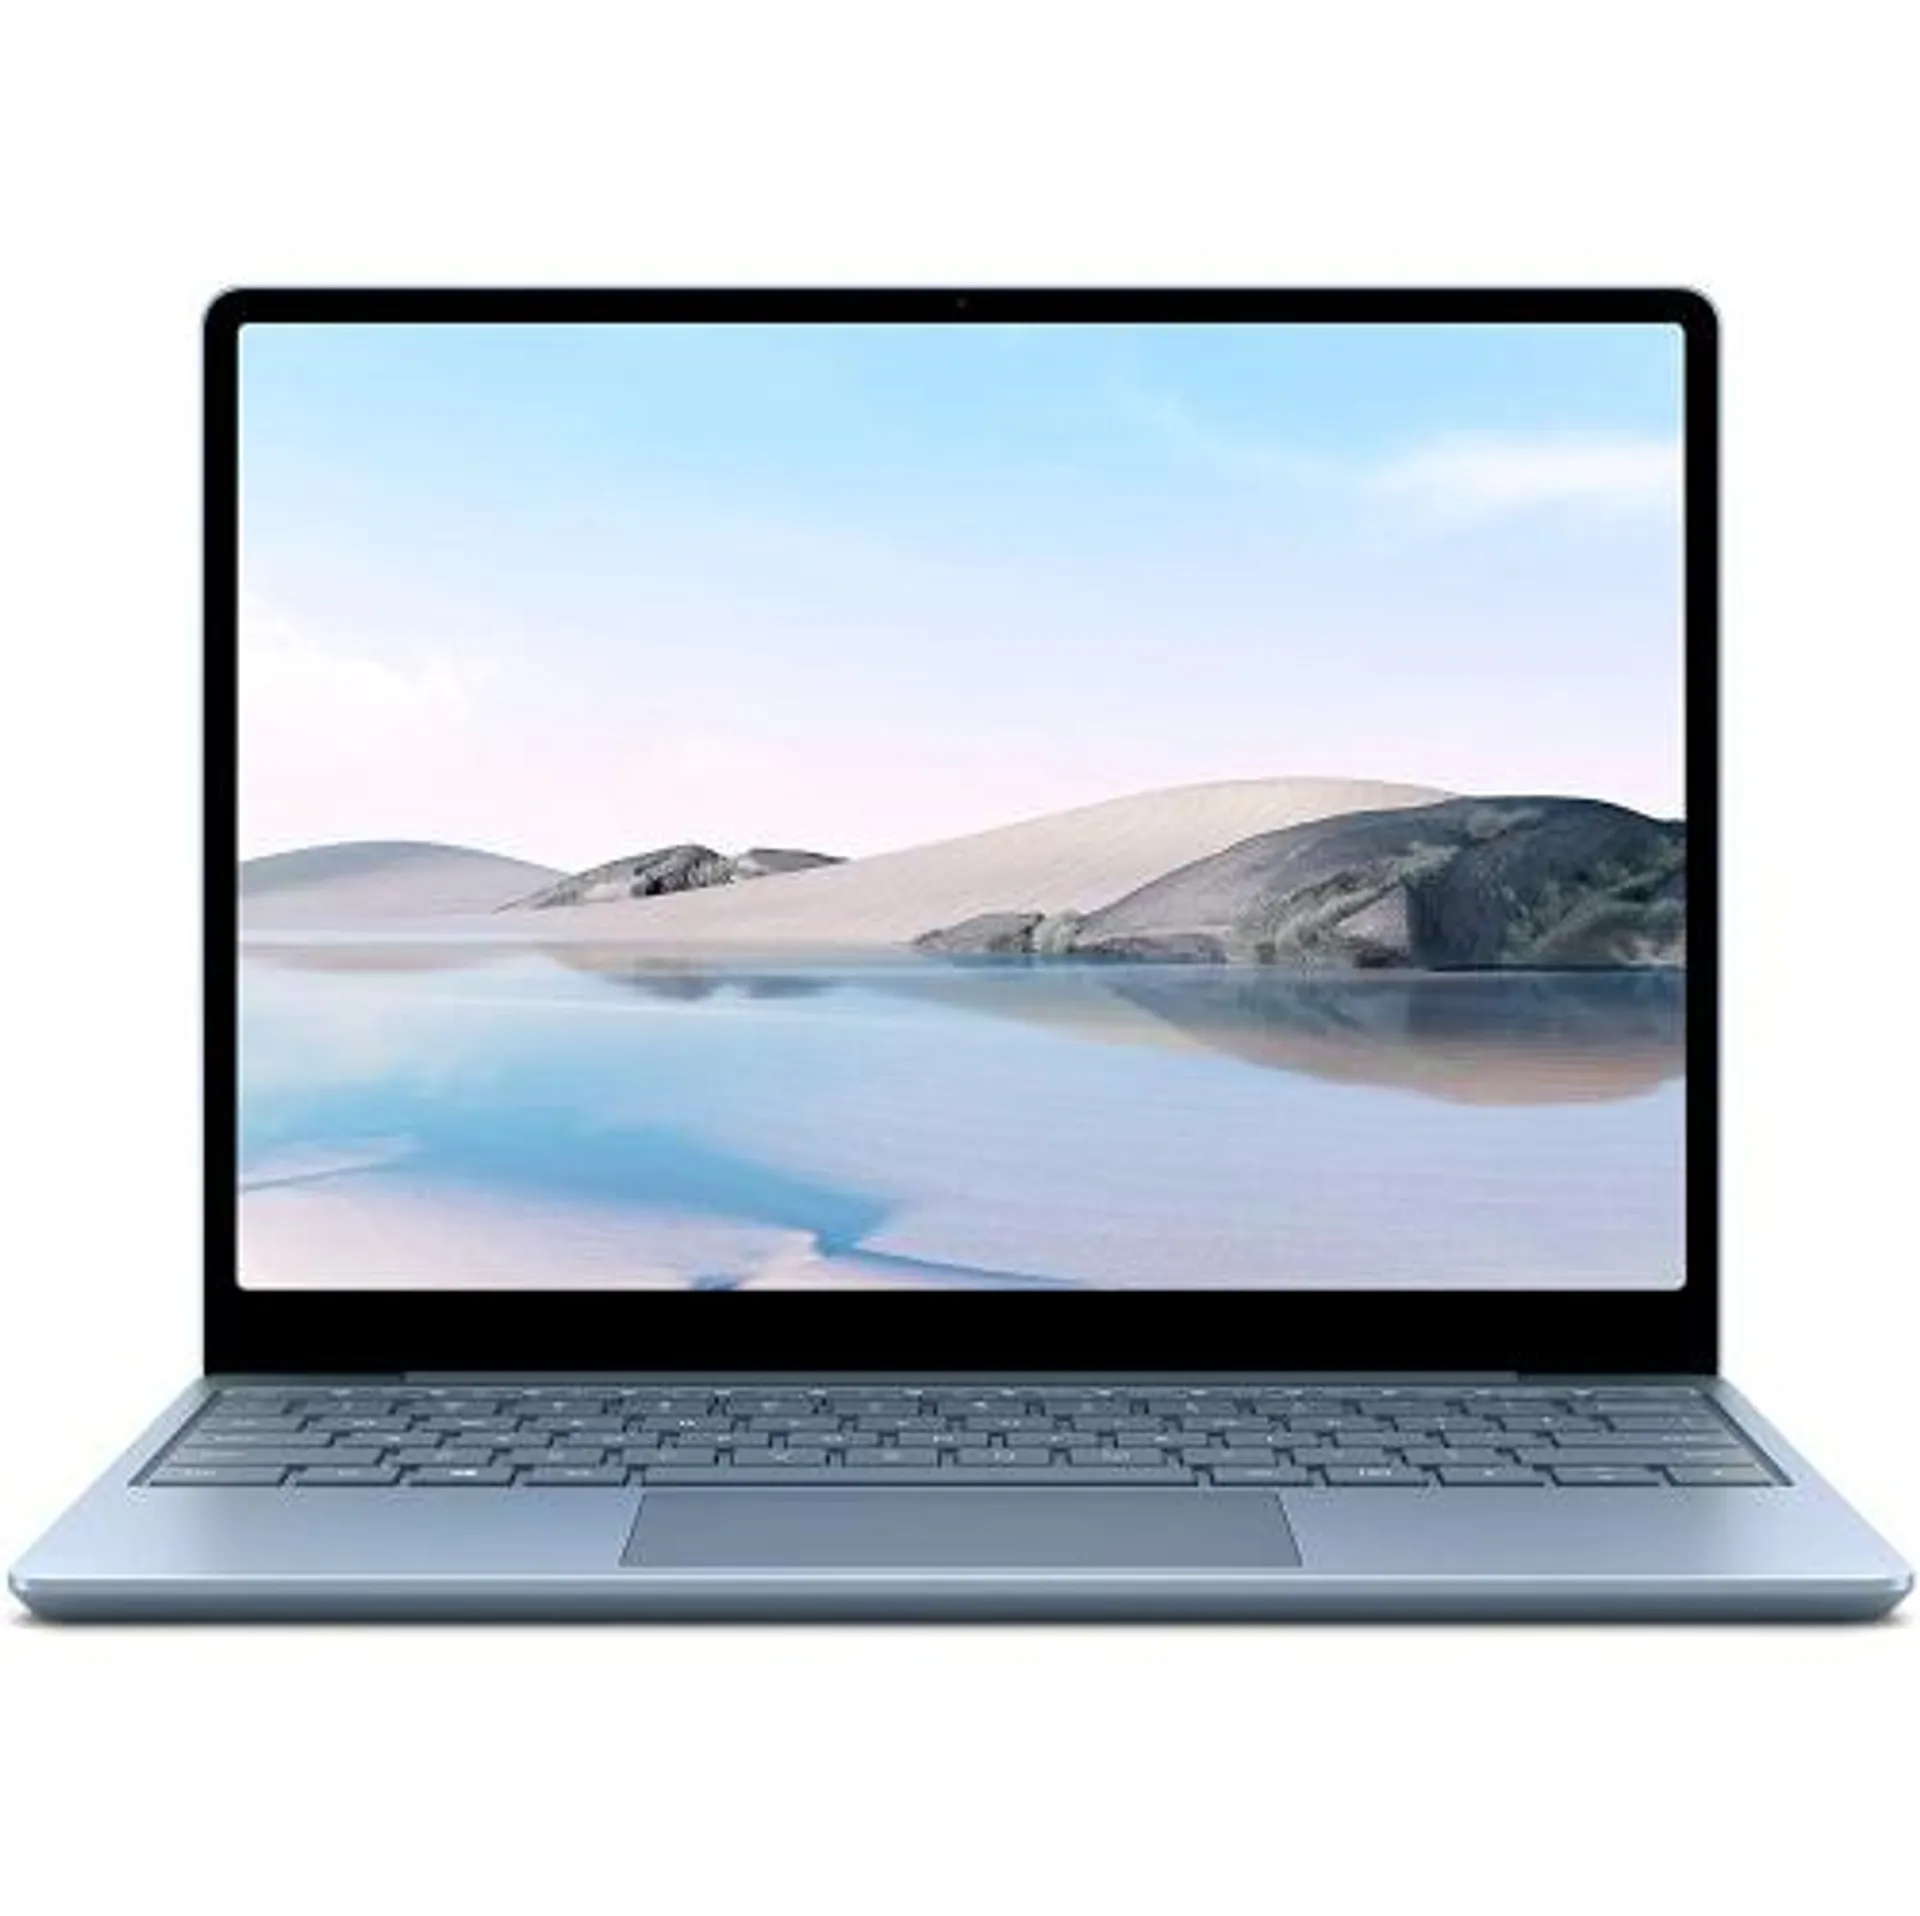 Refurbished (Excellent) - Microsoft Surface Laptop Go 12.4" Multi-Touch - Intel Core i5, 8GB RAM, 128GB SSD, Windows 10 Home in S Mode - Blue - Certified Refurbished